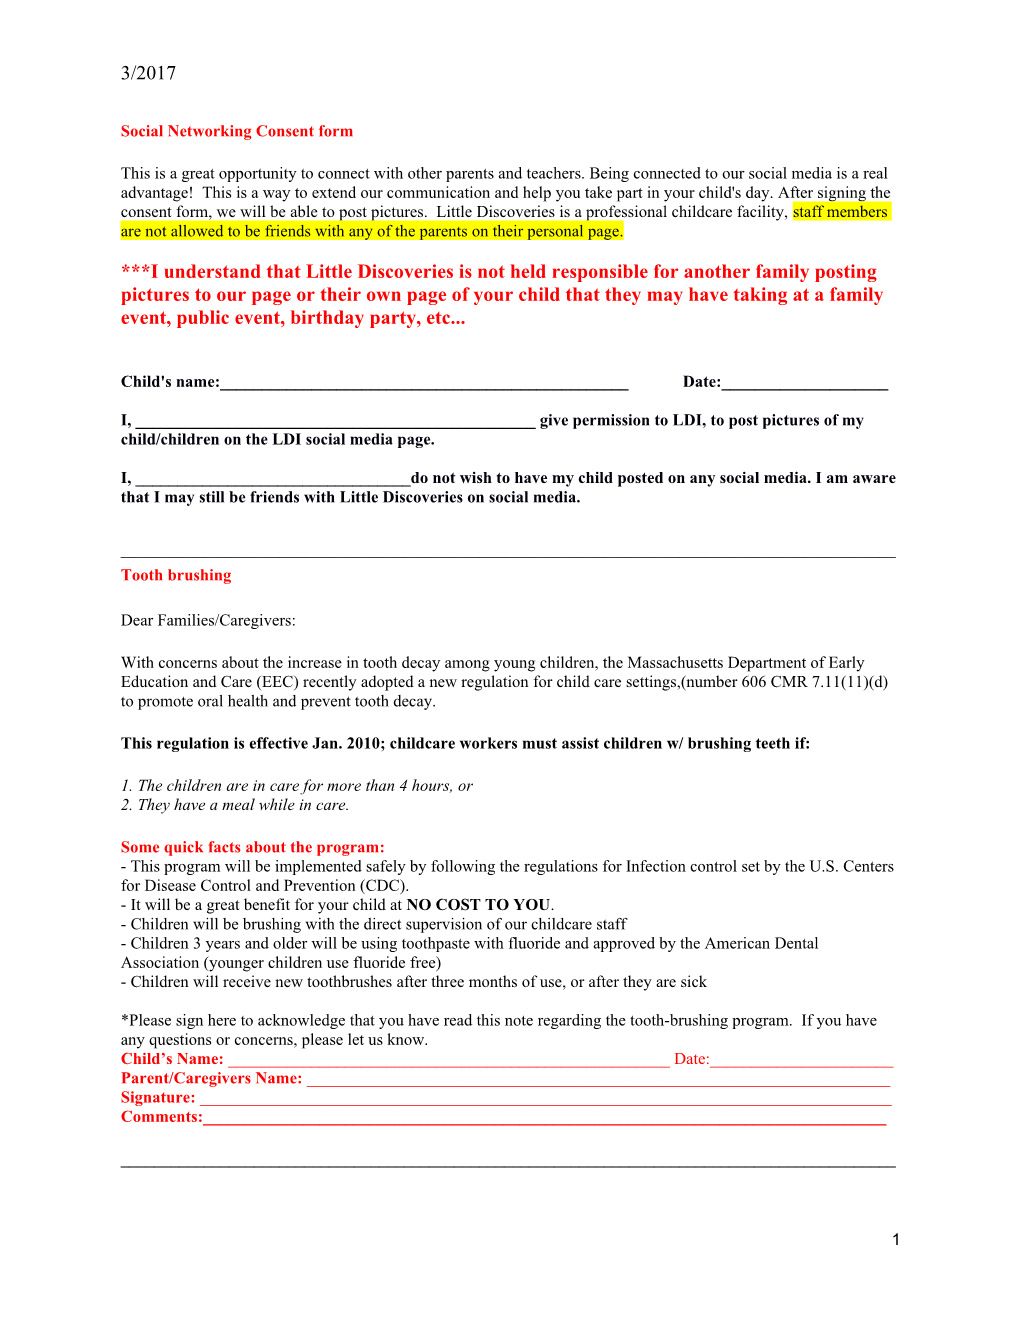 Social Networking Consent Form